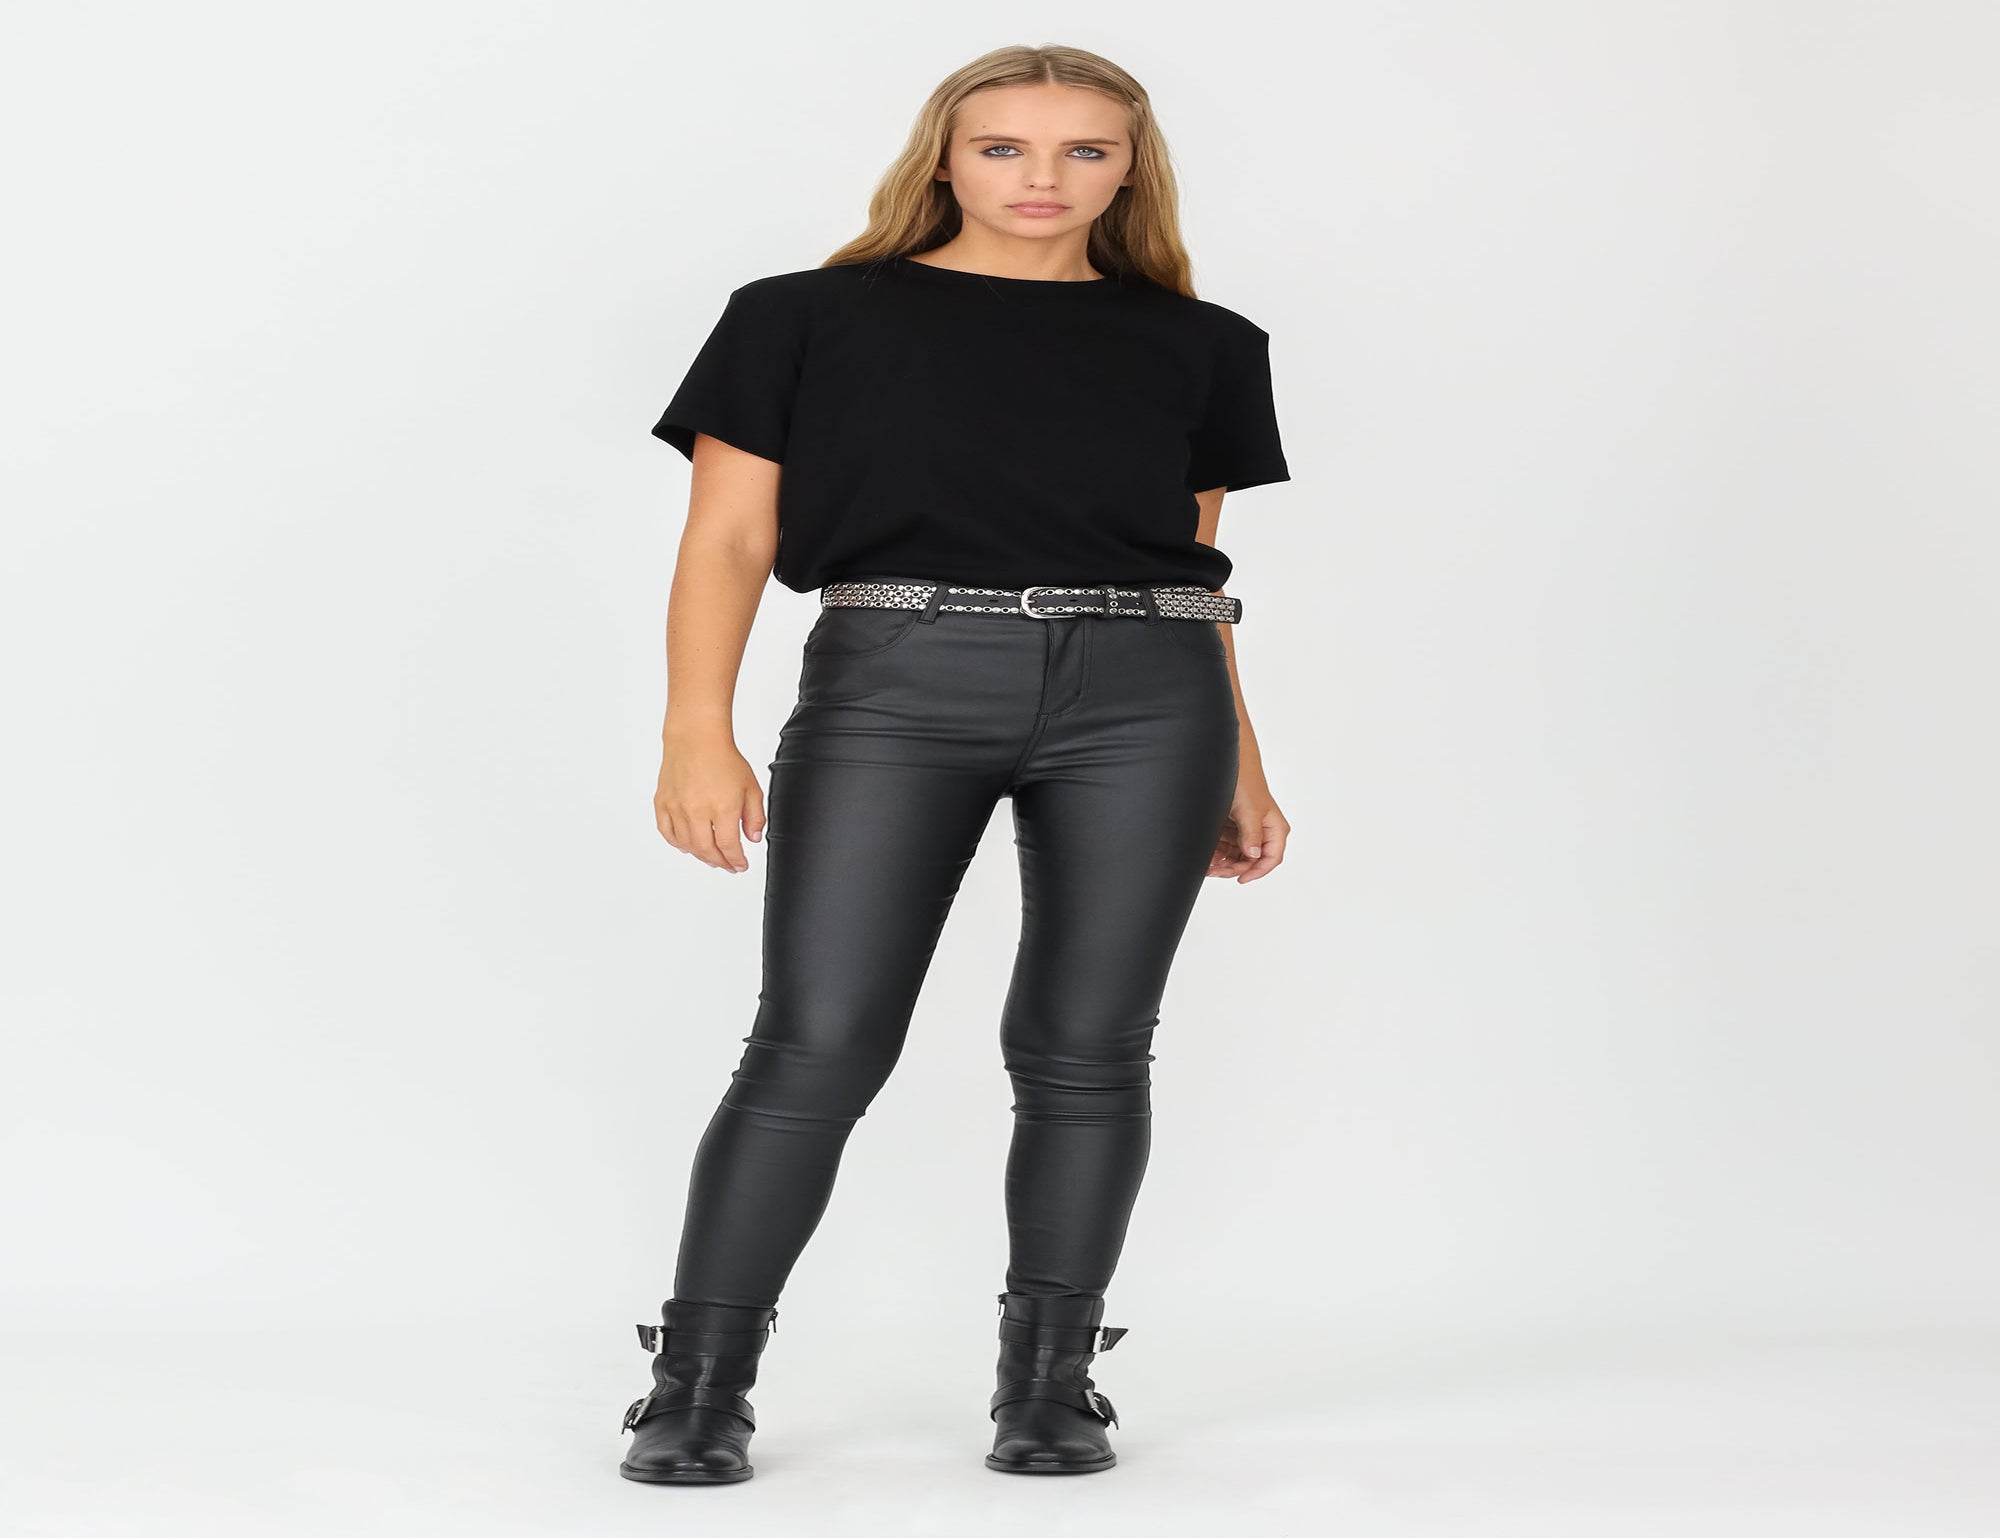 https://www.stormonline.com/content/products/high-rise-leather-look-jean-black-full-42501wvn.jpg?width=3900&height=3000&fit=bounds